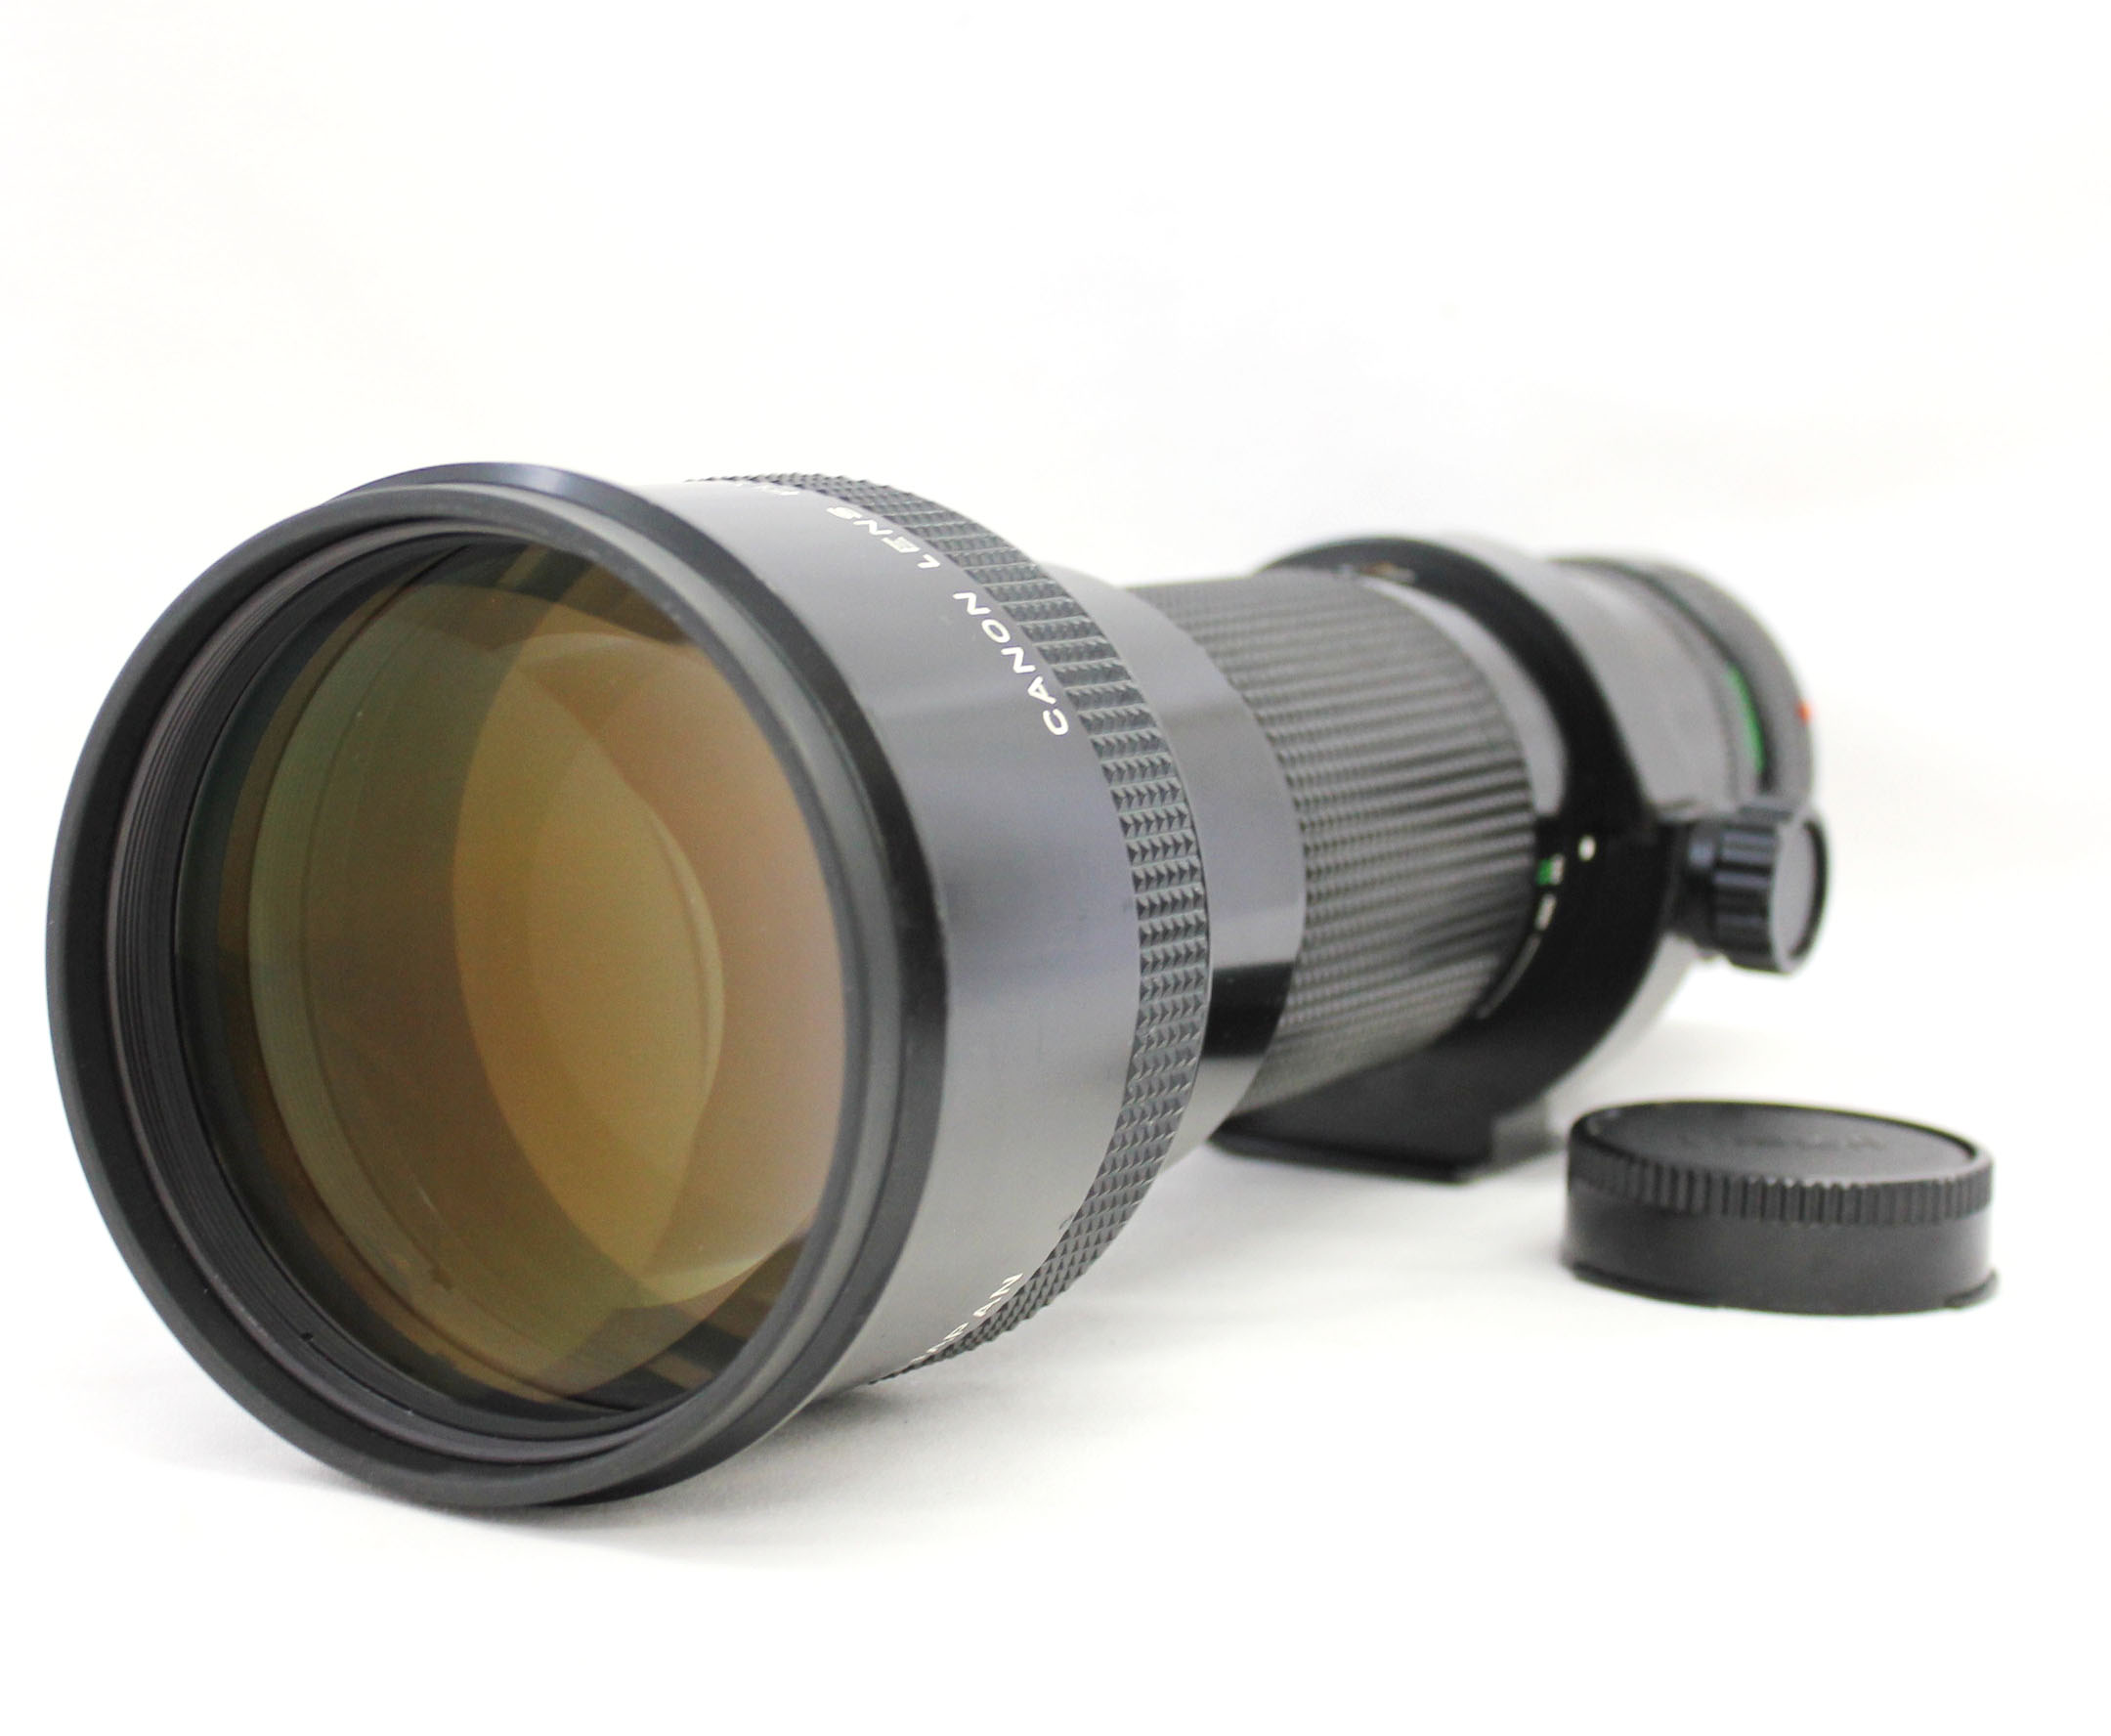 Japan Used Camera Shop | [Excellent+++++] Canon New FD NFD 400mm F/4.5 MF Telephoto Lens from Japan